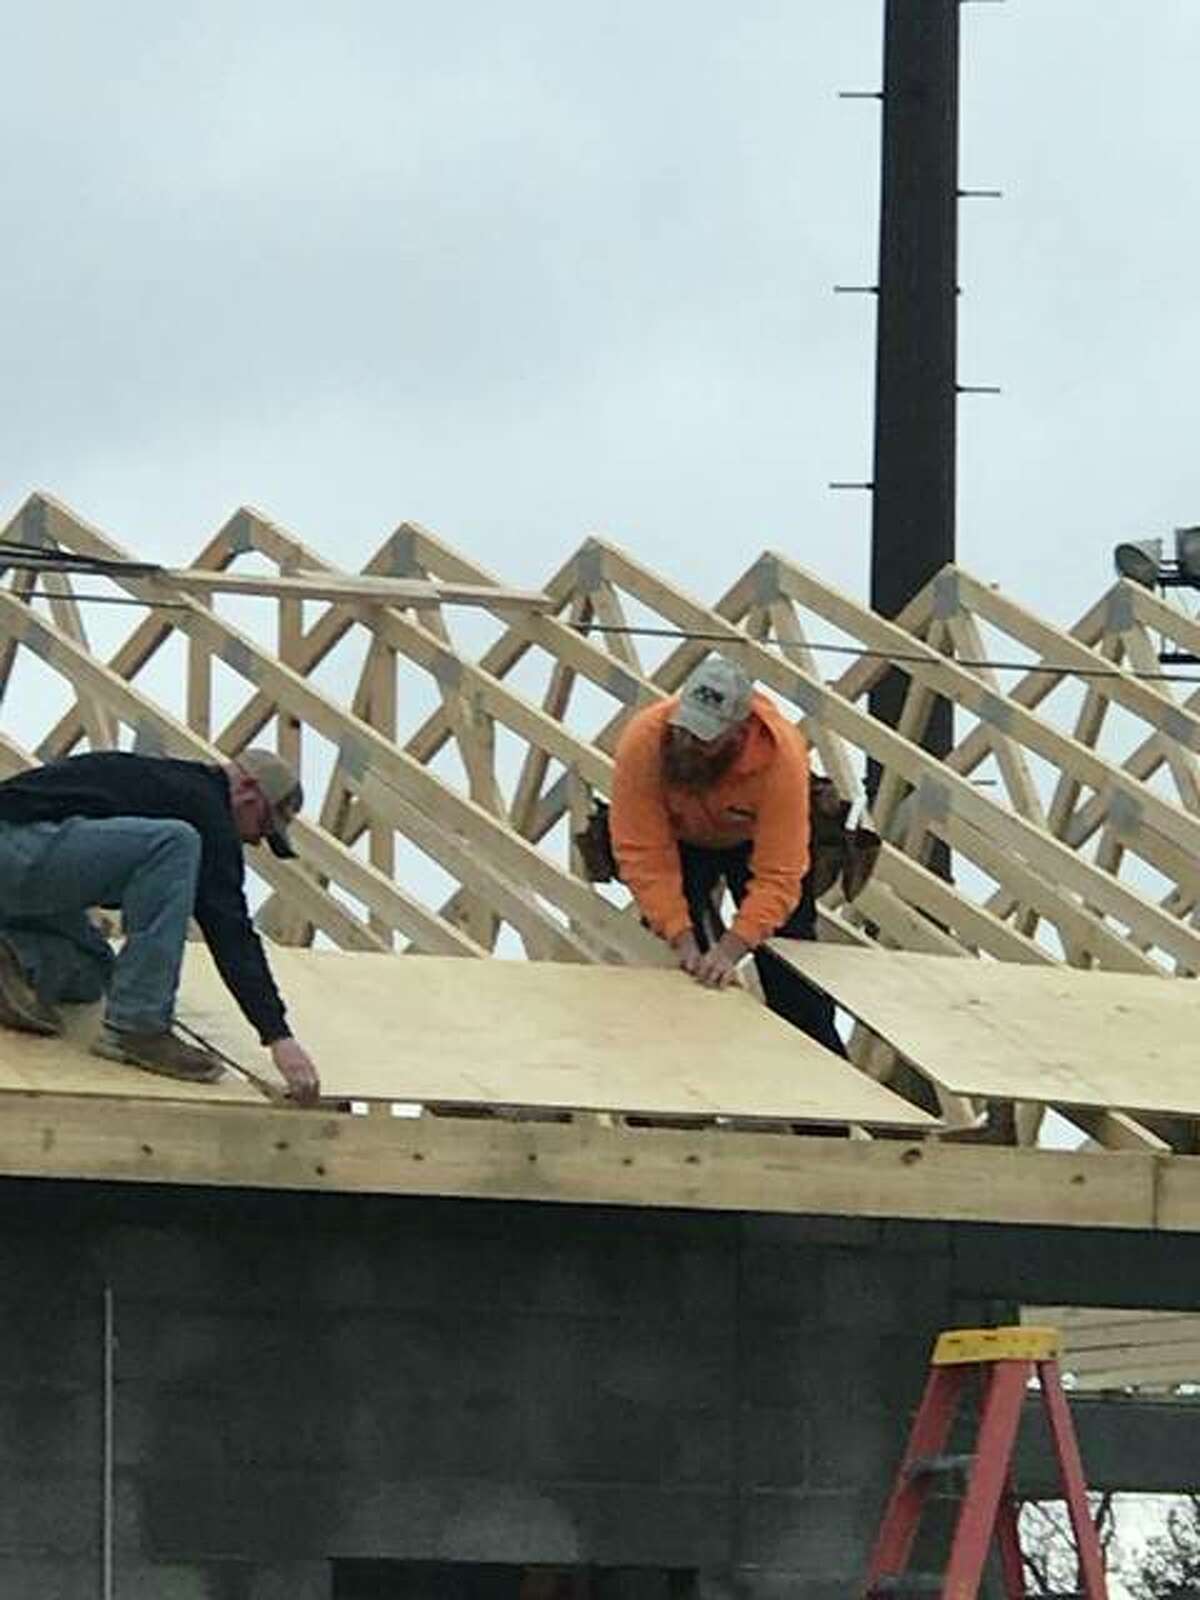 Volunteers from Jun Construction of Godfrey put up roof trusses and sheeting on the evolving concession and restroom building at Gordon F. Moore Park on Wednesday, Jan. 10. The $300,000 structure is one of 12 of the most significant projects for which the city issued a building permit in 2017.